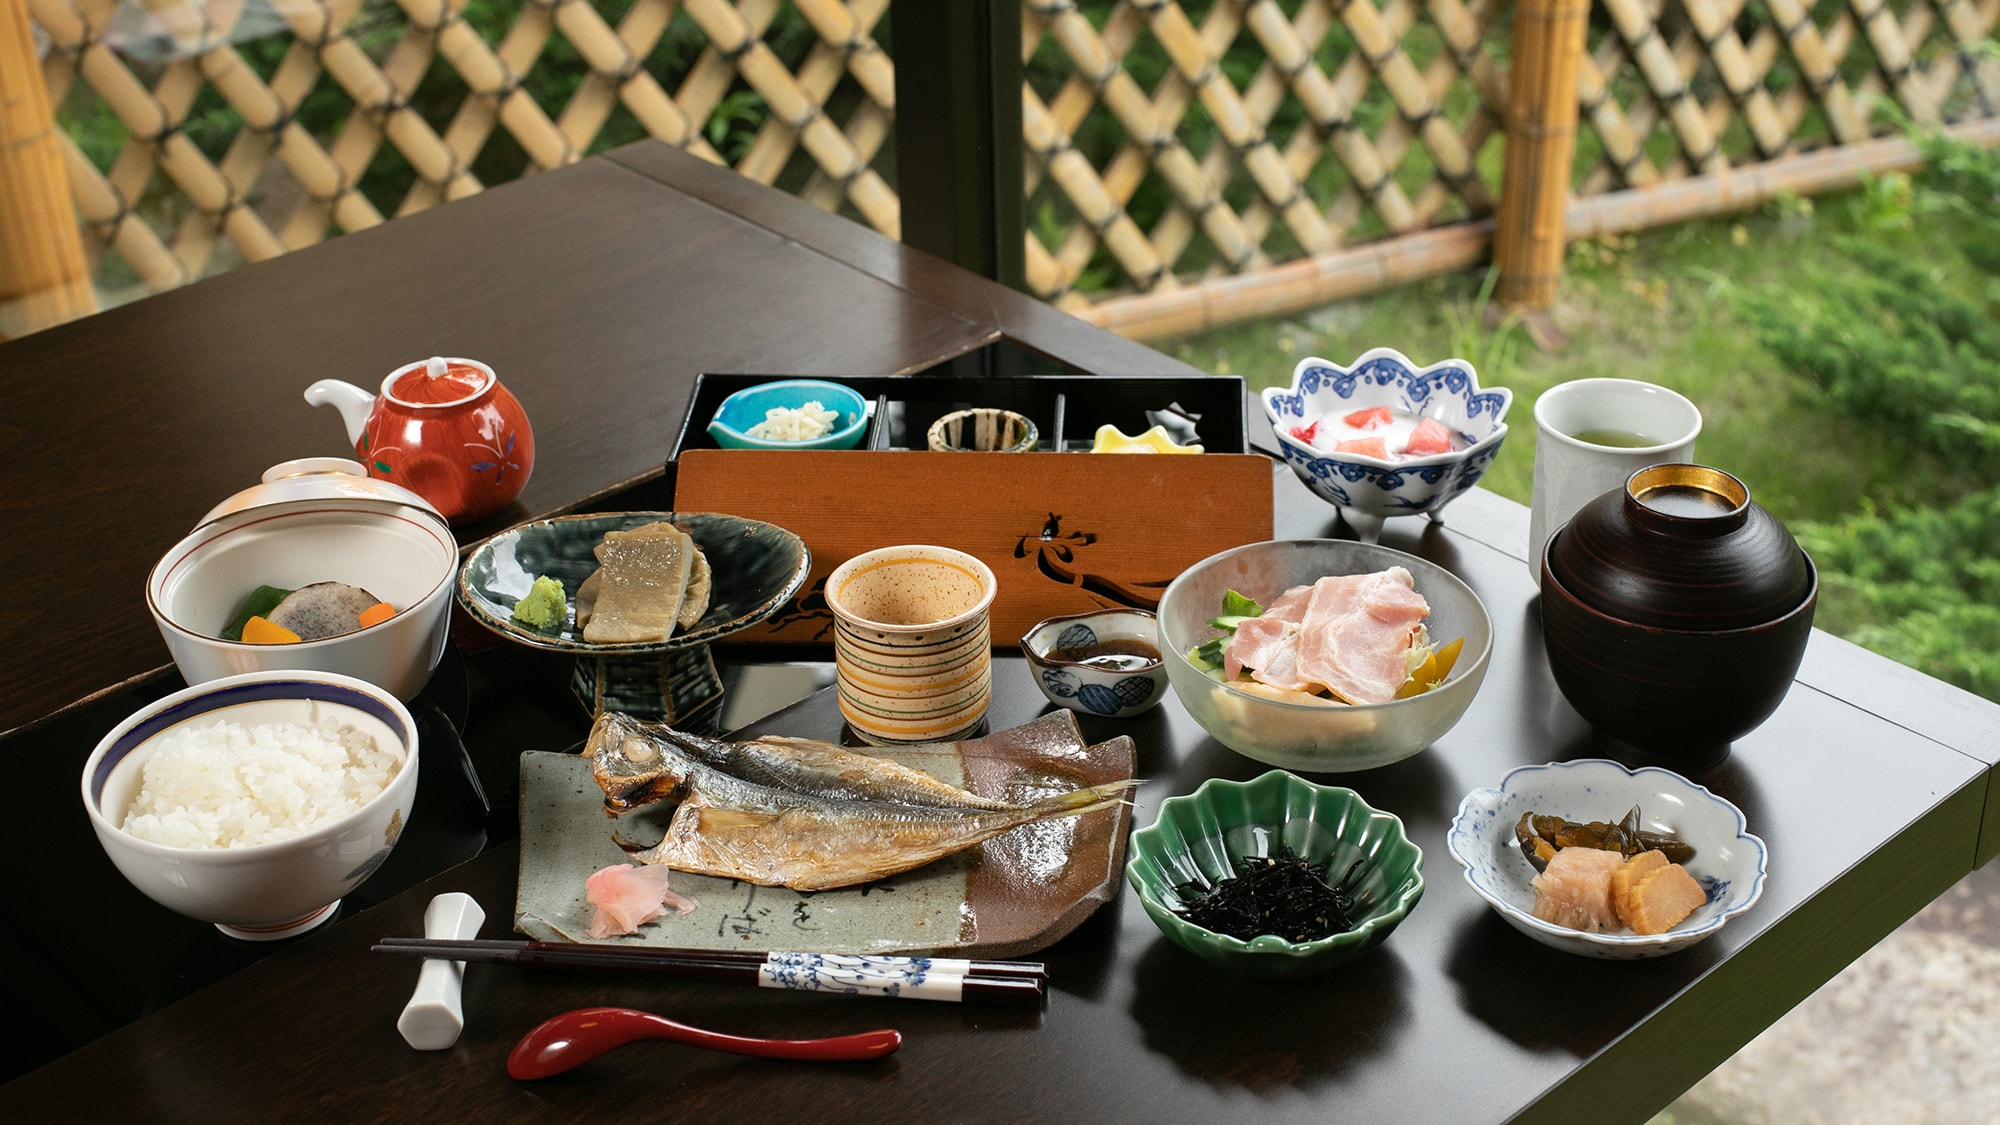 * [Breakfast example] We offer Japanese breakfast such as plump dried fish, black hampen, salad, and cooked food from the prefecture.